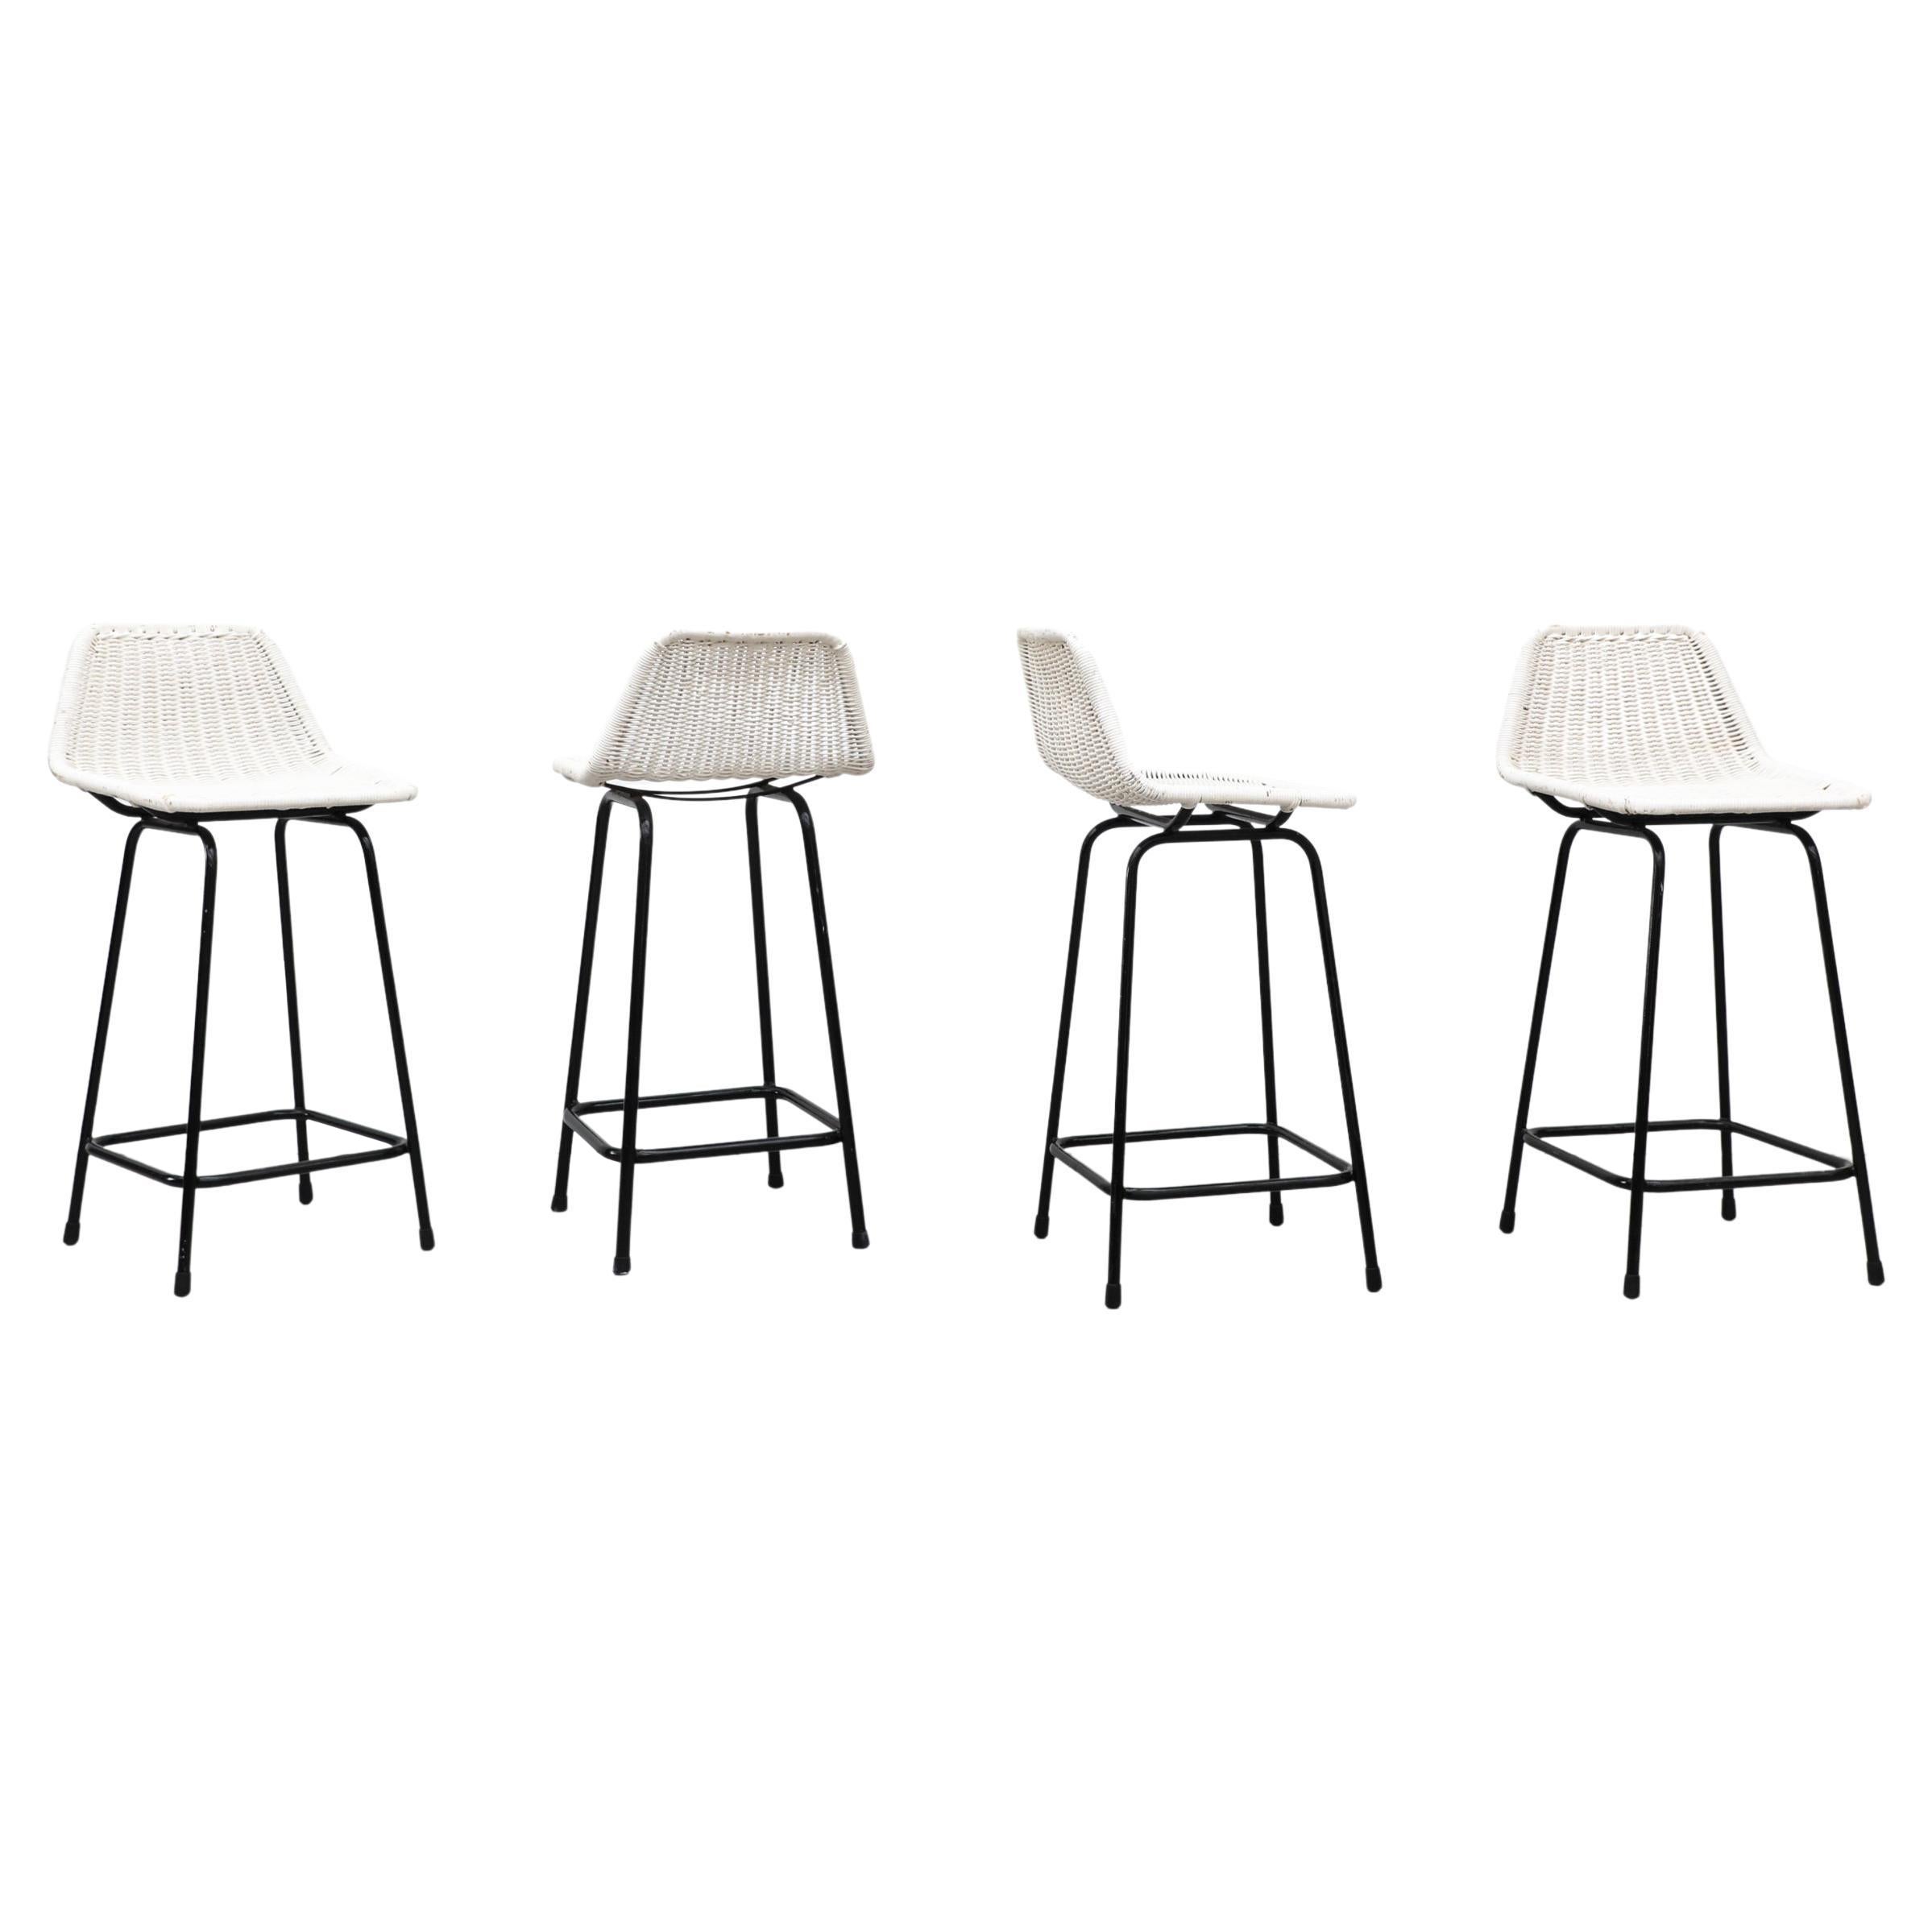 Set of 4 White Wicker Charlotte Perriand Style Counter Height Stools For Sale